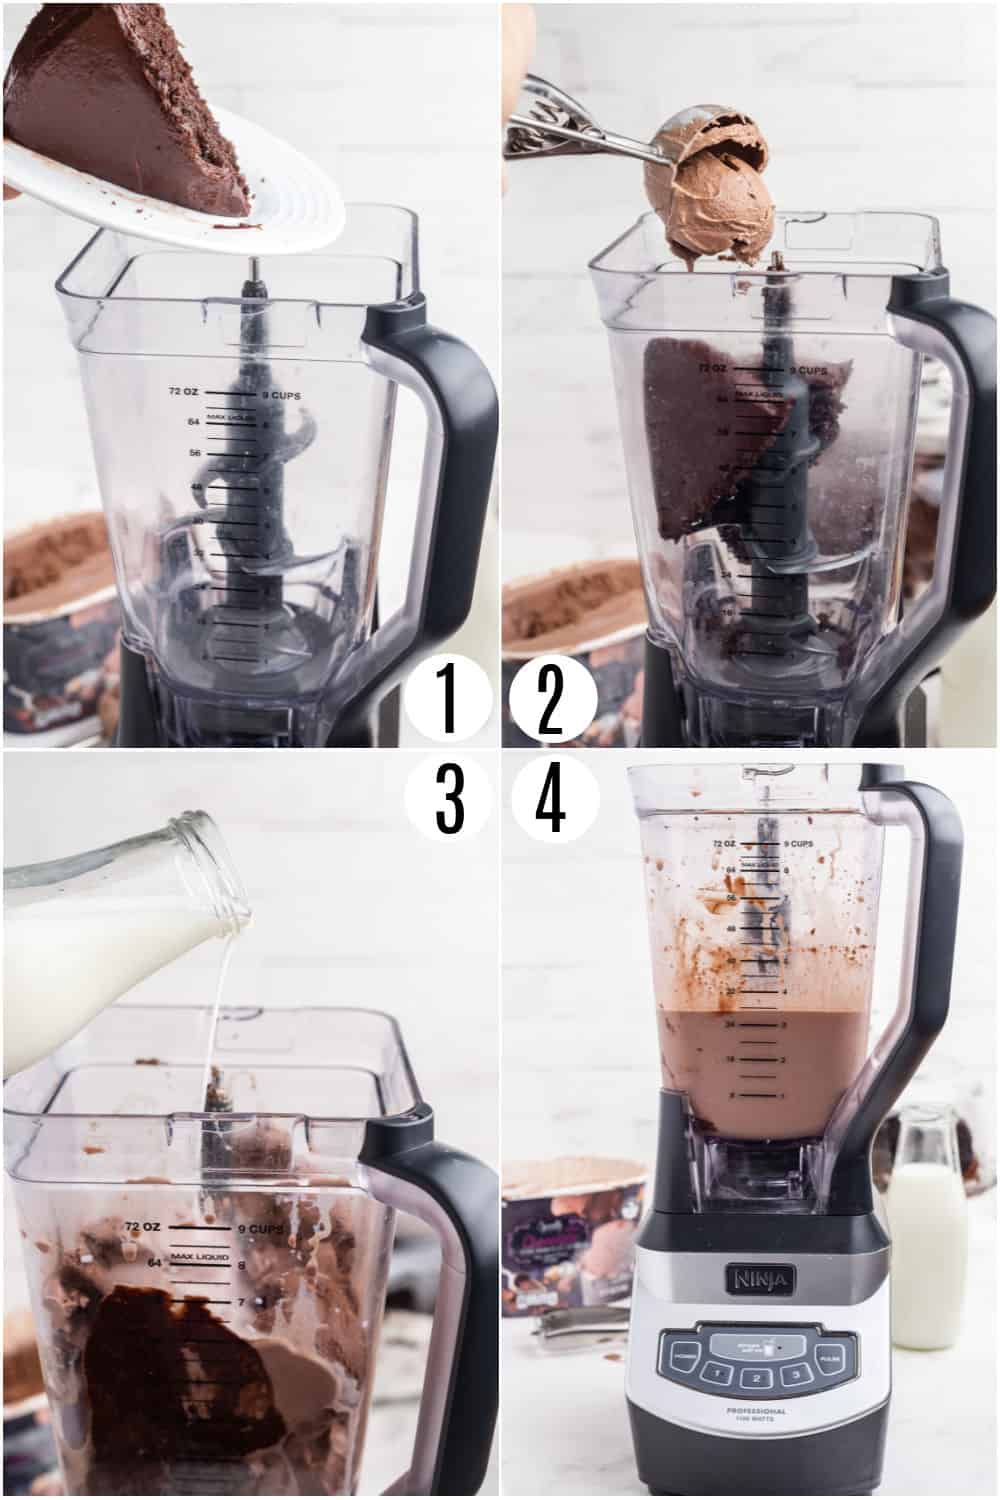 Step by step photos showing how to make chocolate cake shakes in a blender.